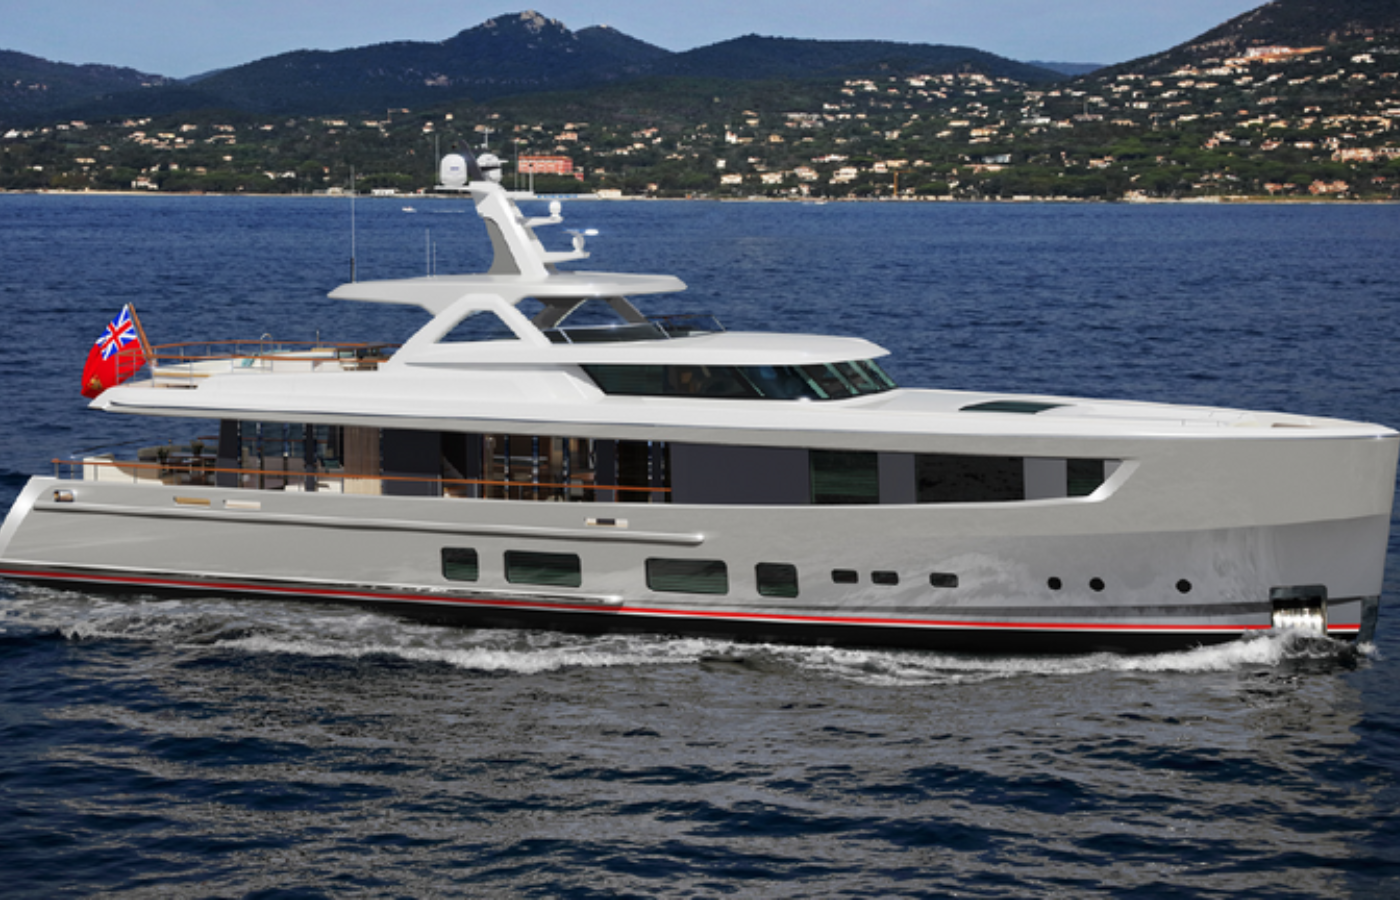 Seventh Mulder Thirty Six Yacht Hull Launched [In the News]